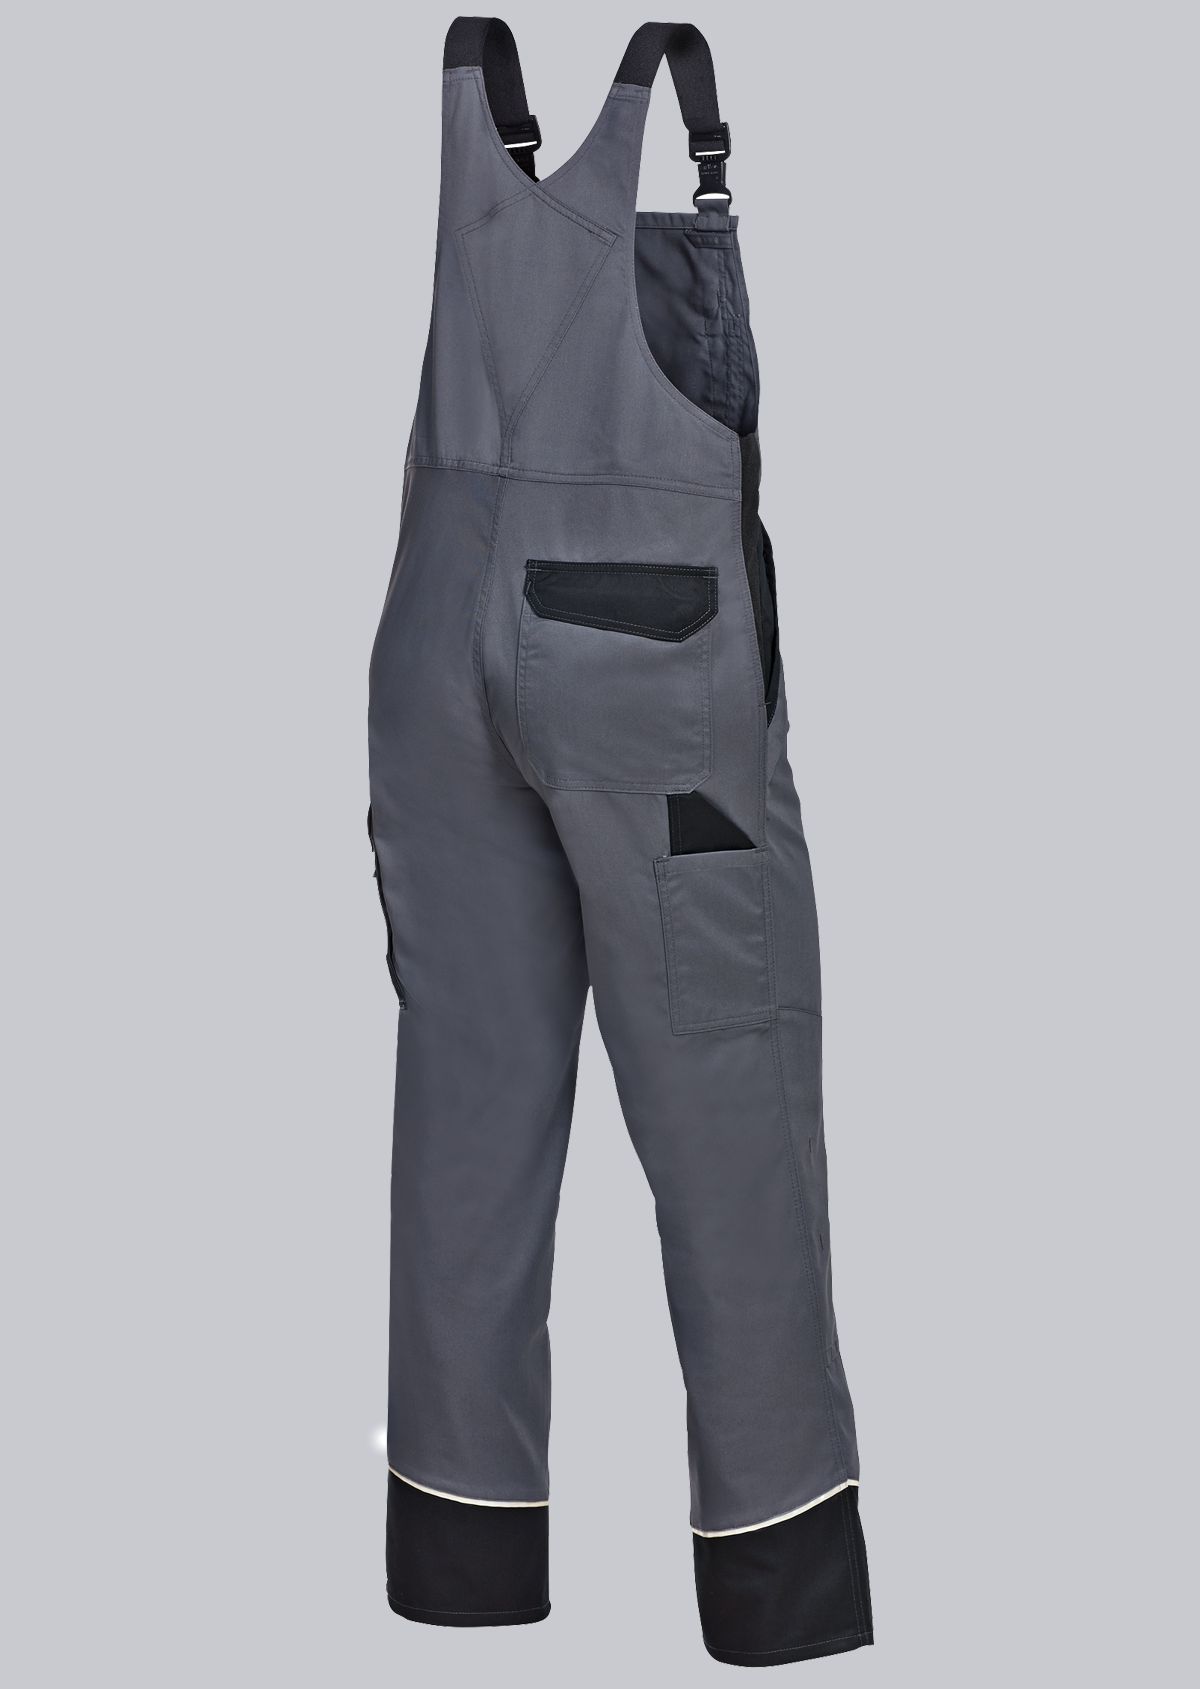 BP® Bib & brace with concealed buttons and knee pad pockets